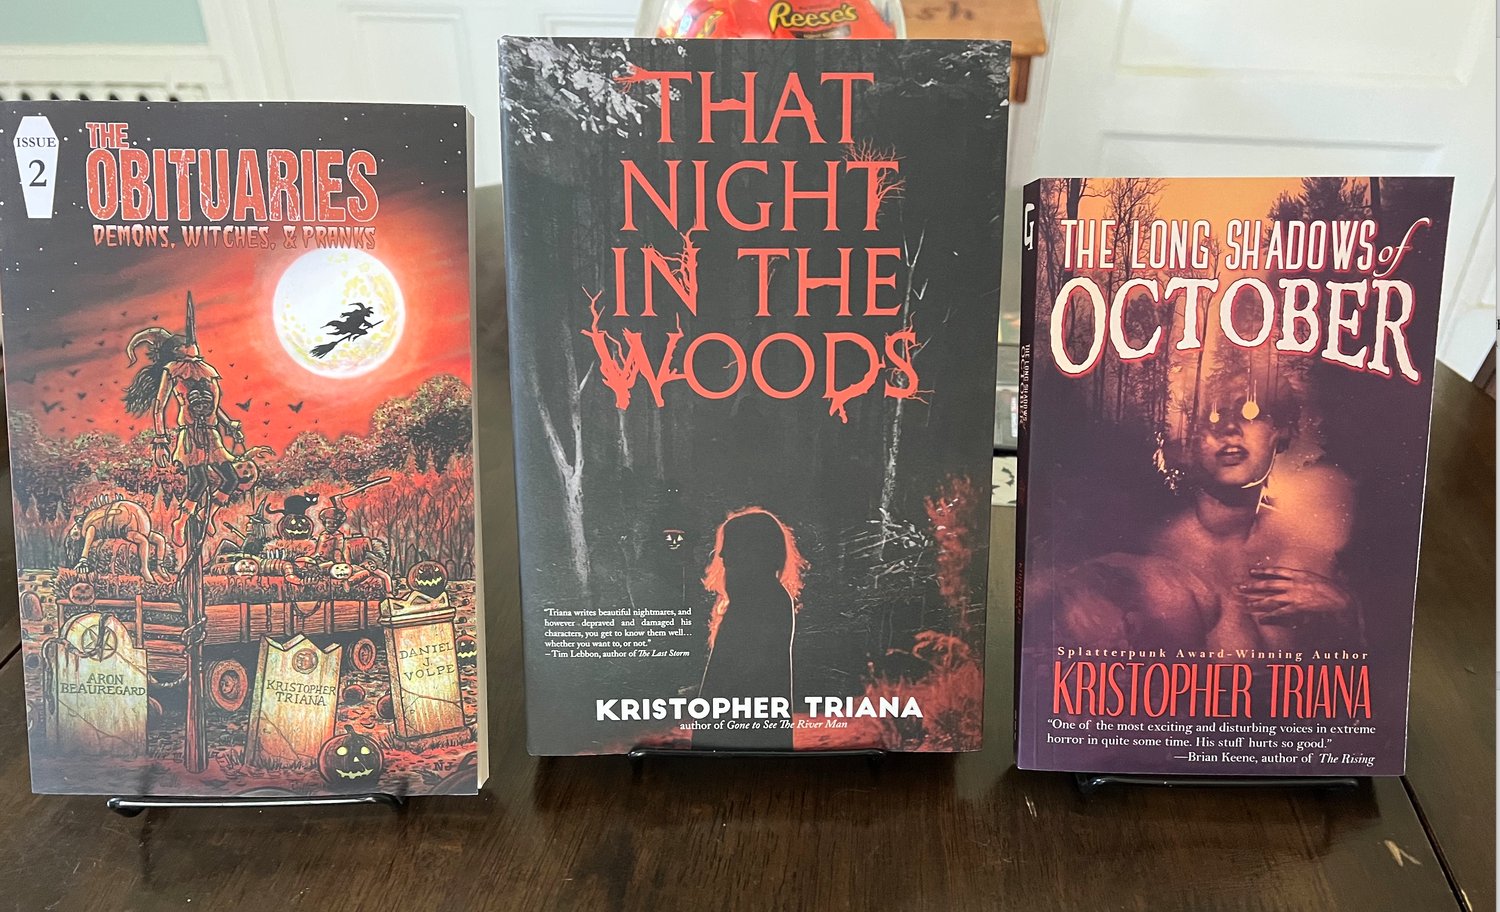 That Night in the Woods, by Kristopher Triana